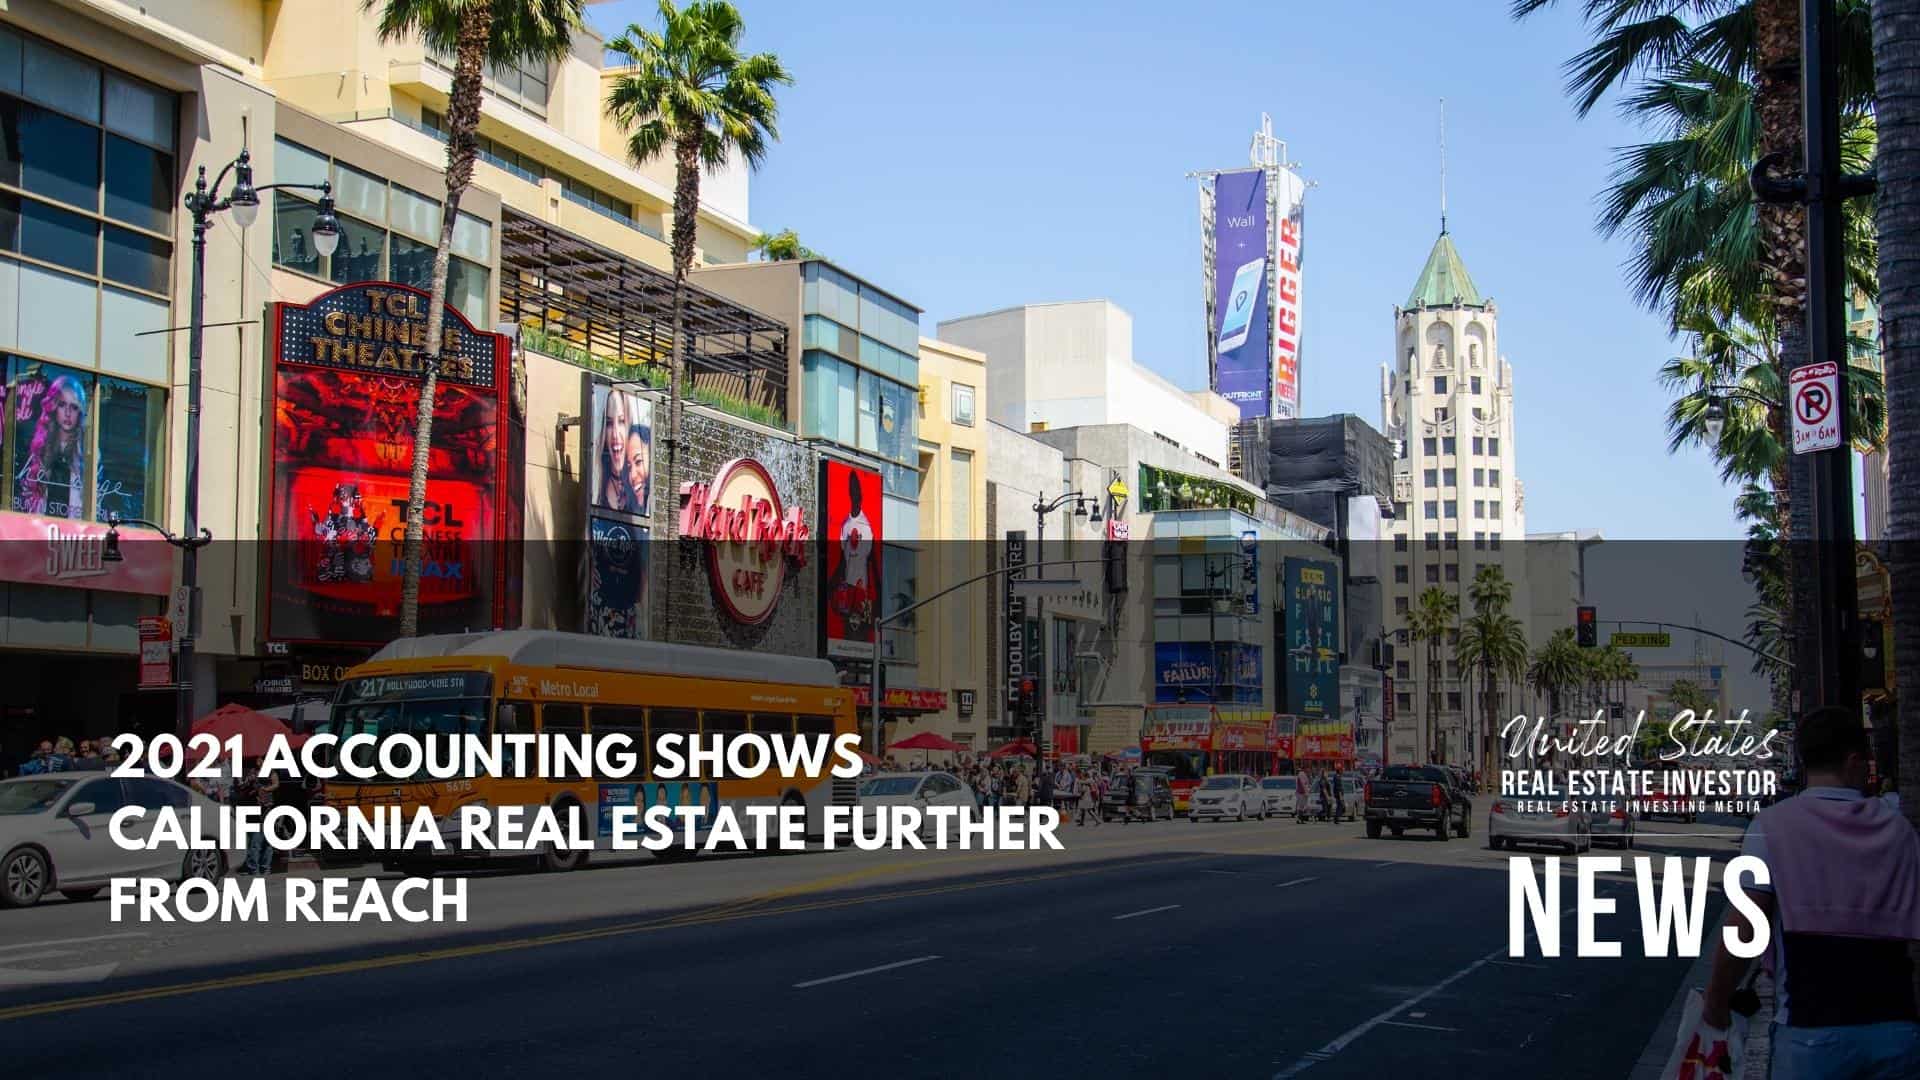 United States Real Estate Investor - Real estate investing media - 2021 Accounting Shows California Real Estate Further From Reach